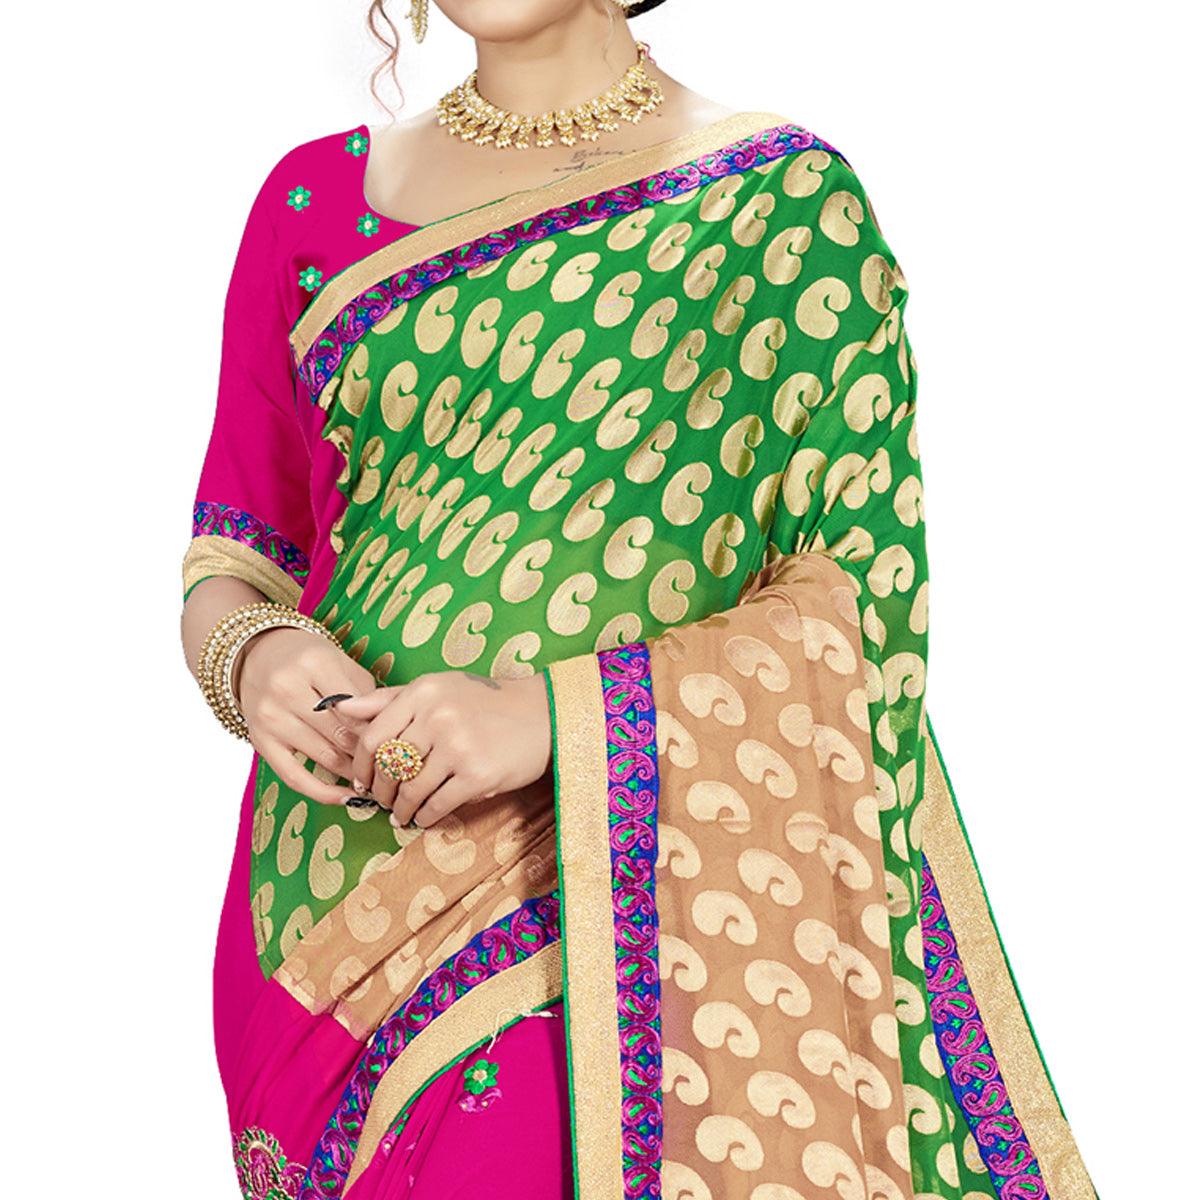 Top Trendy Half and Half Saree Designs To Flaunt Your Style